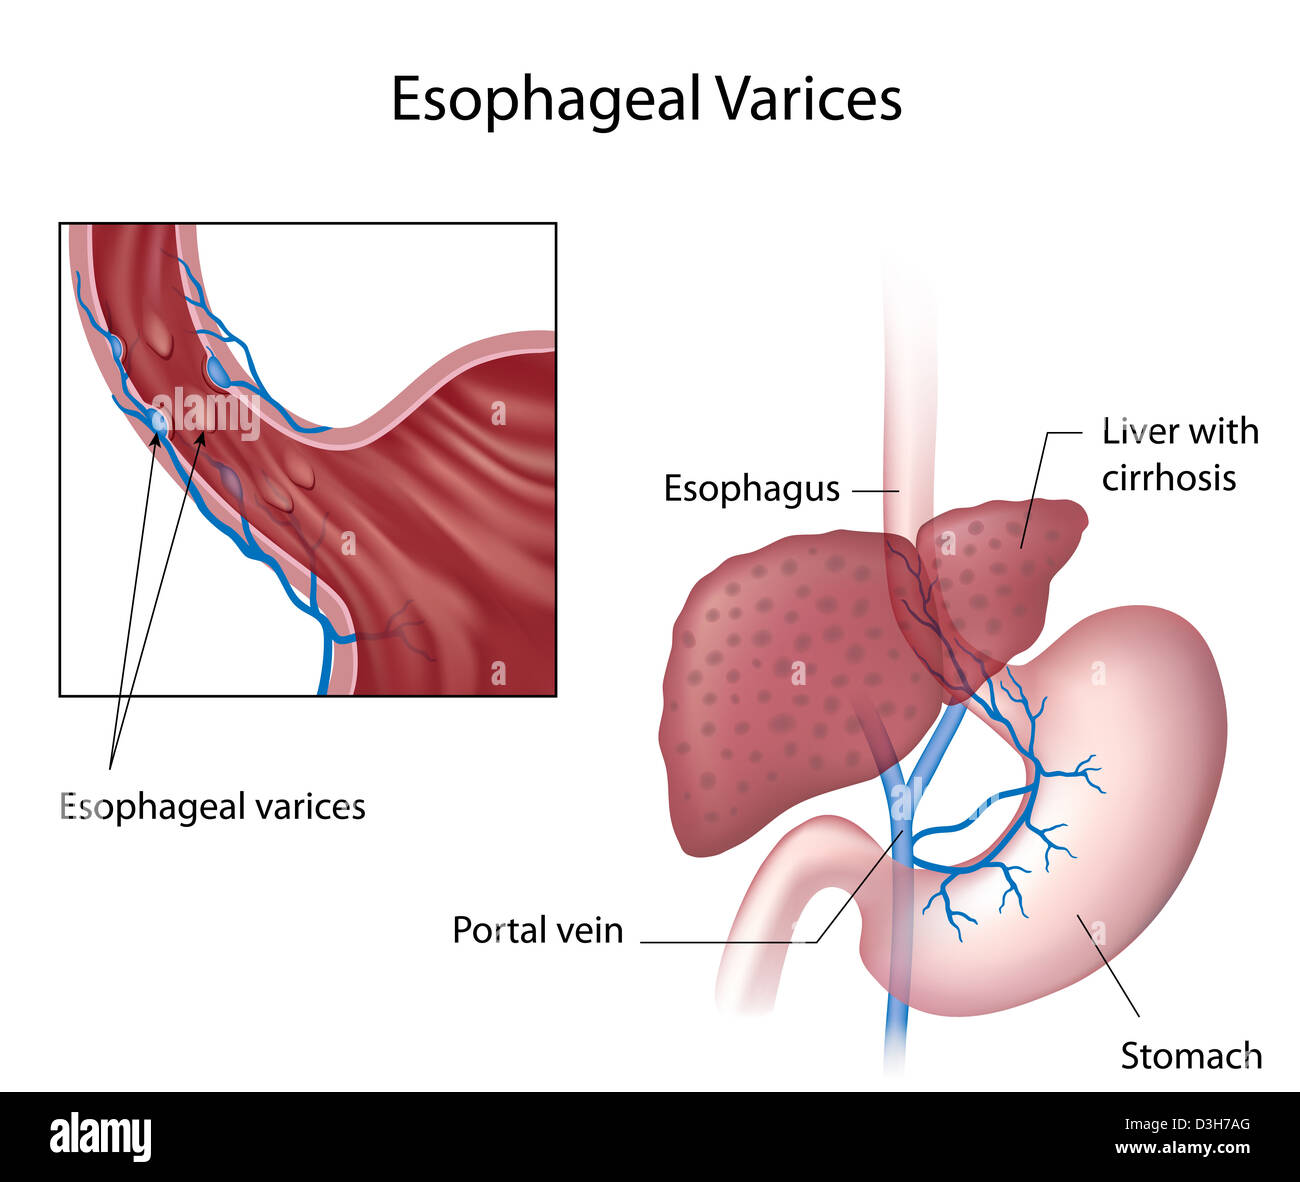 Esophageal varices due to liver cirrhosis Stock Photo